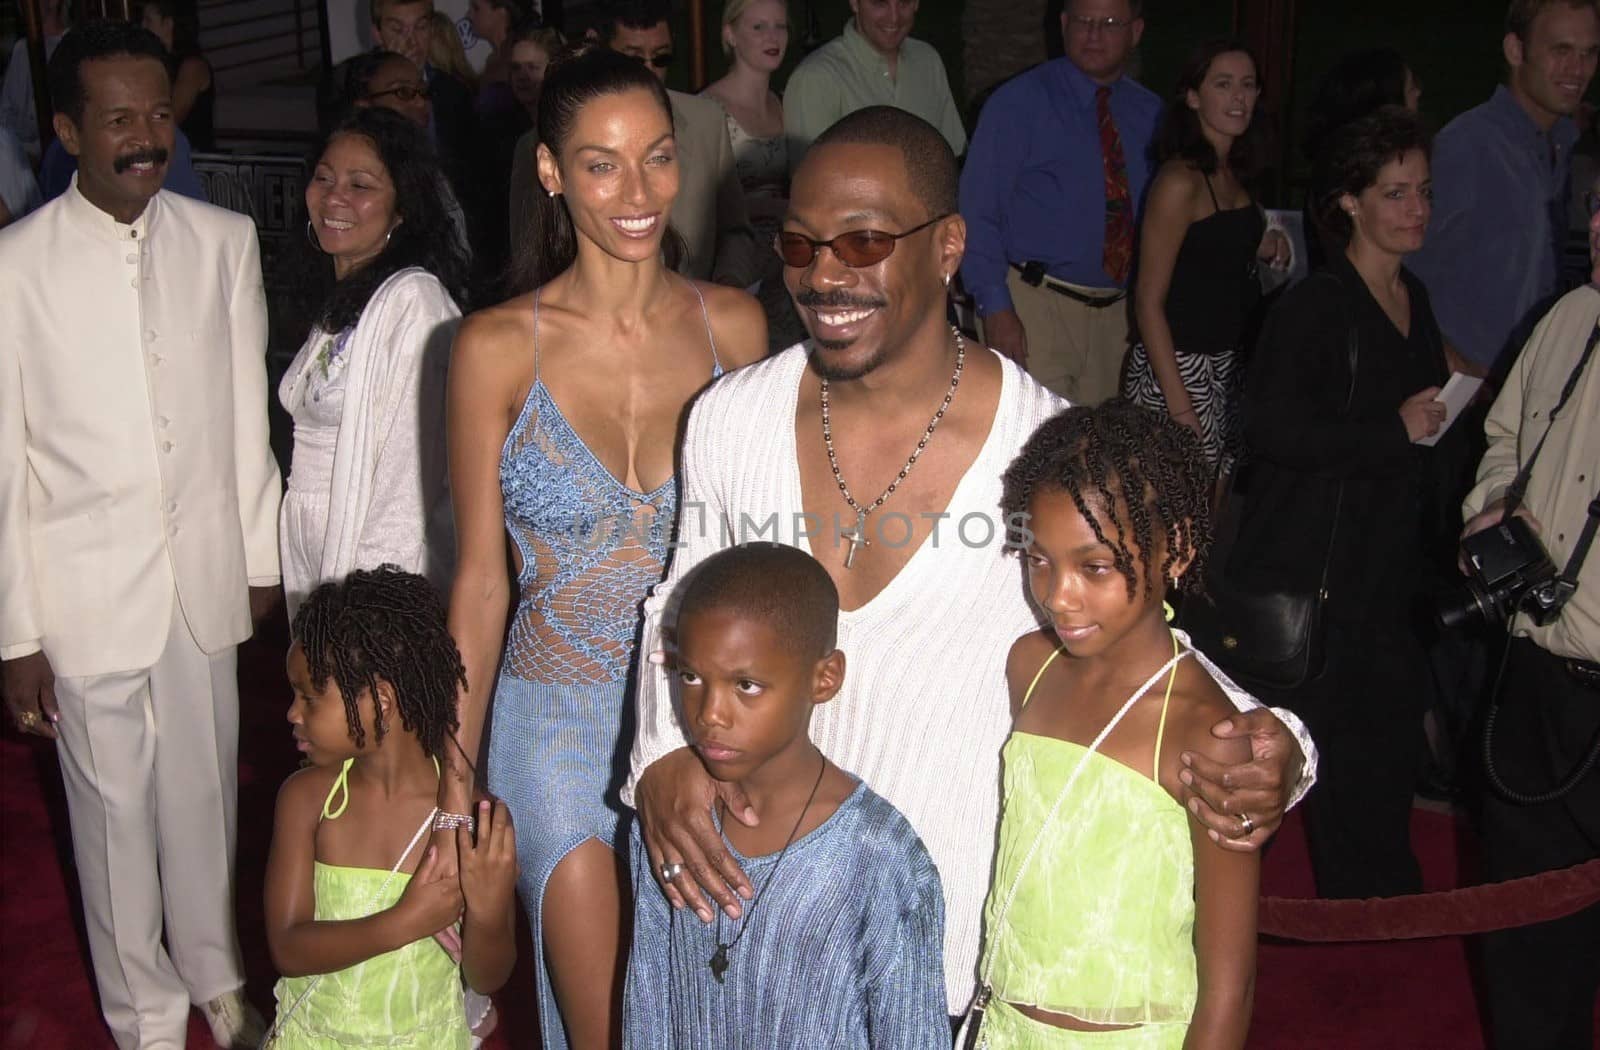 Eddie Murphy and Family at the premiere of Nutty Professor II in Universal City. 07-24-00